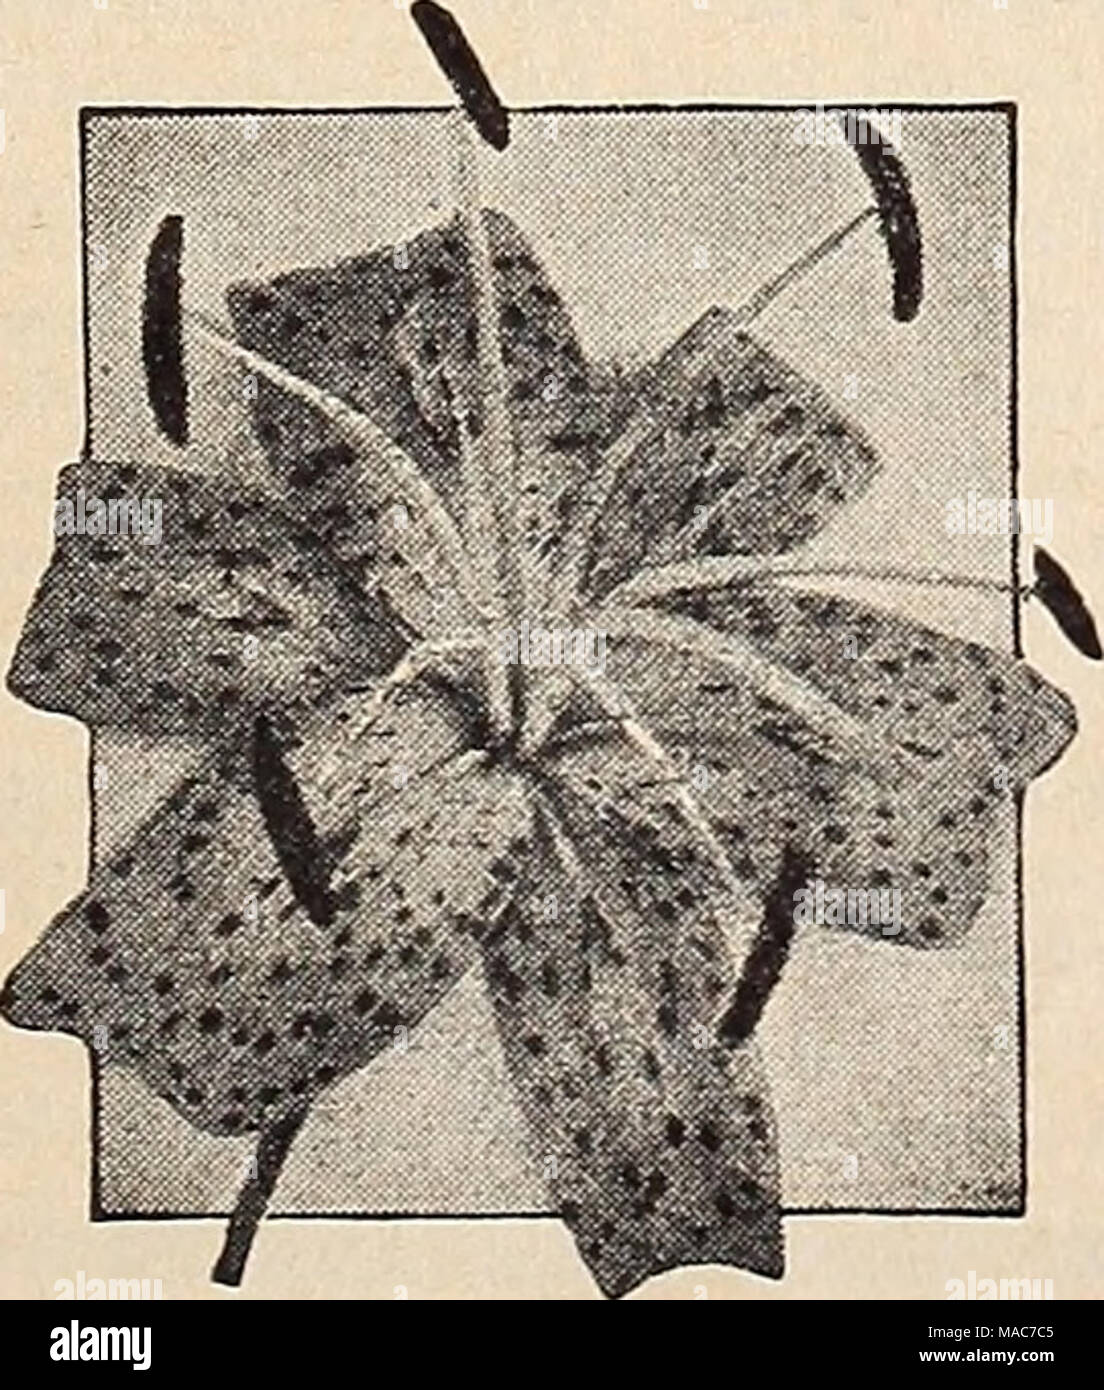 . Dreer's novelties and specialties for a more beautiful garden : 1941103 years of Dreer quality seeds plants bulbs . Tiger Lily Summer Hyacinfh Cape Hyacinth—Galtonia 47-060 Hyacinthus candicans. State- ly strong flower spikes, 3-5 feet tall, each bearing during the summer or early fall from 20 to 30 pure white bell-shaped pendant blooms. Hardy as far north as Philadelphia. 20c each; 3 for 55c; 12 for $2.00. Tigridia—&quot;SfteW Flower Pavonia grandiflora Large, quaintly-shaped blooms of exotic beauty. 18 inches tall flowering during the summer and fall months. Plant after the weather has war Stock Photo